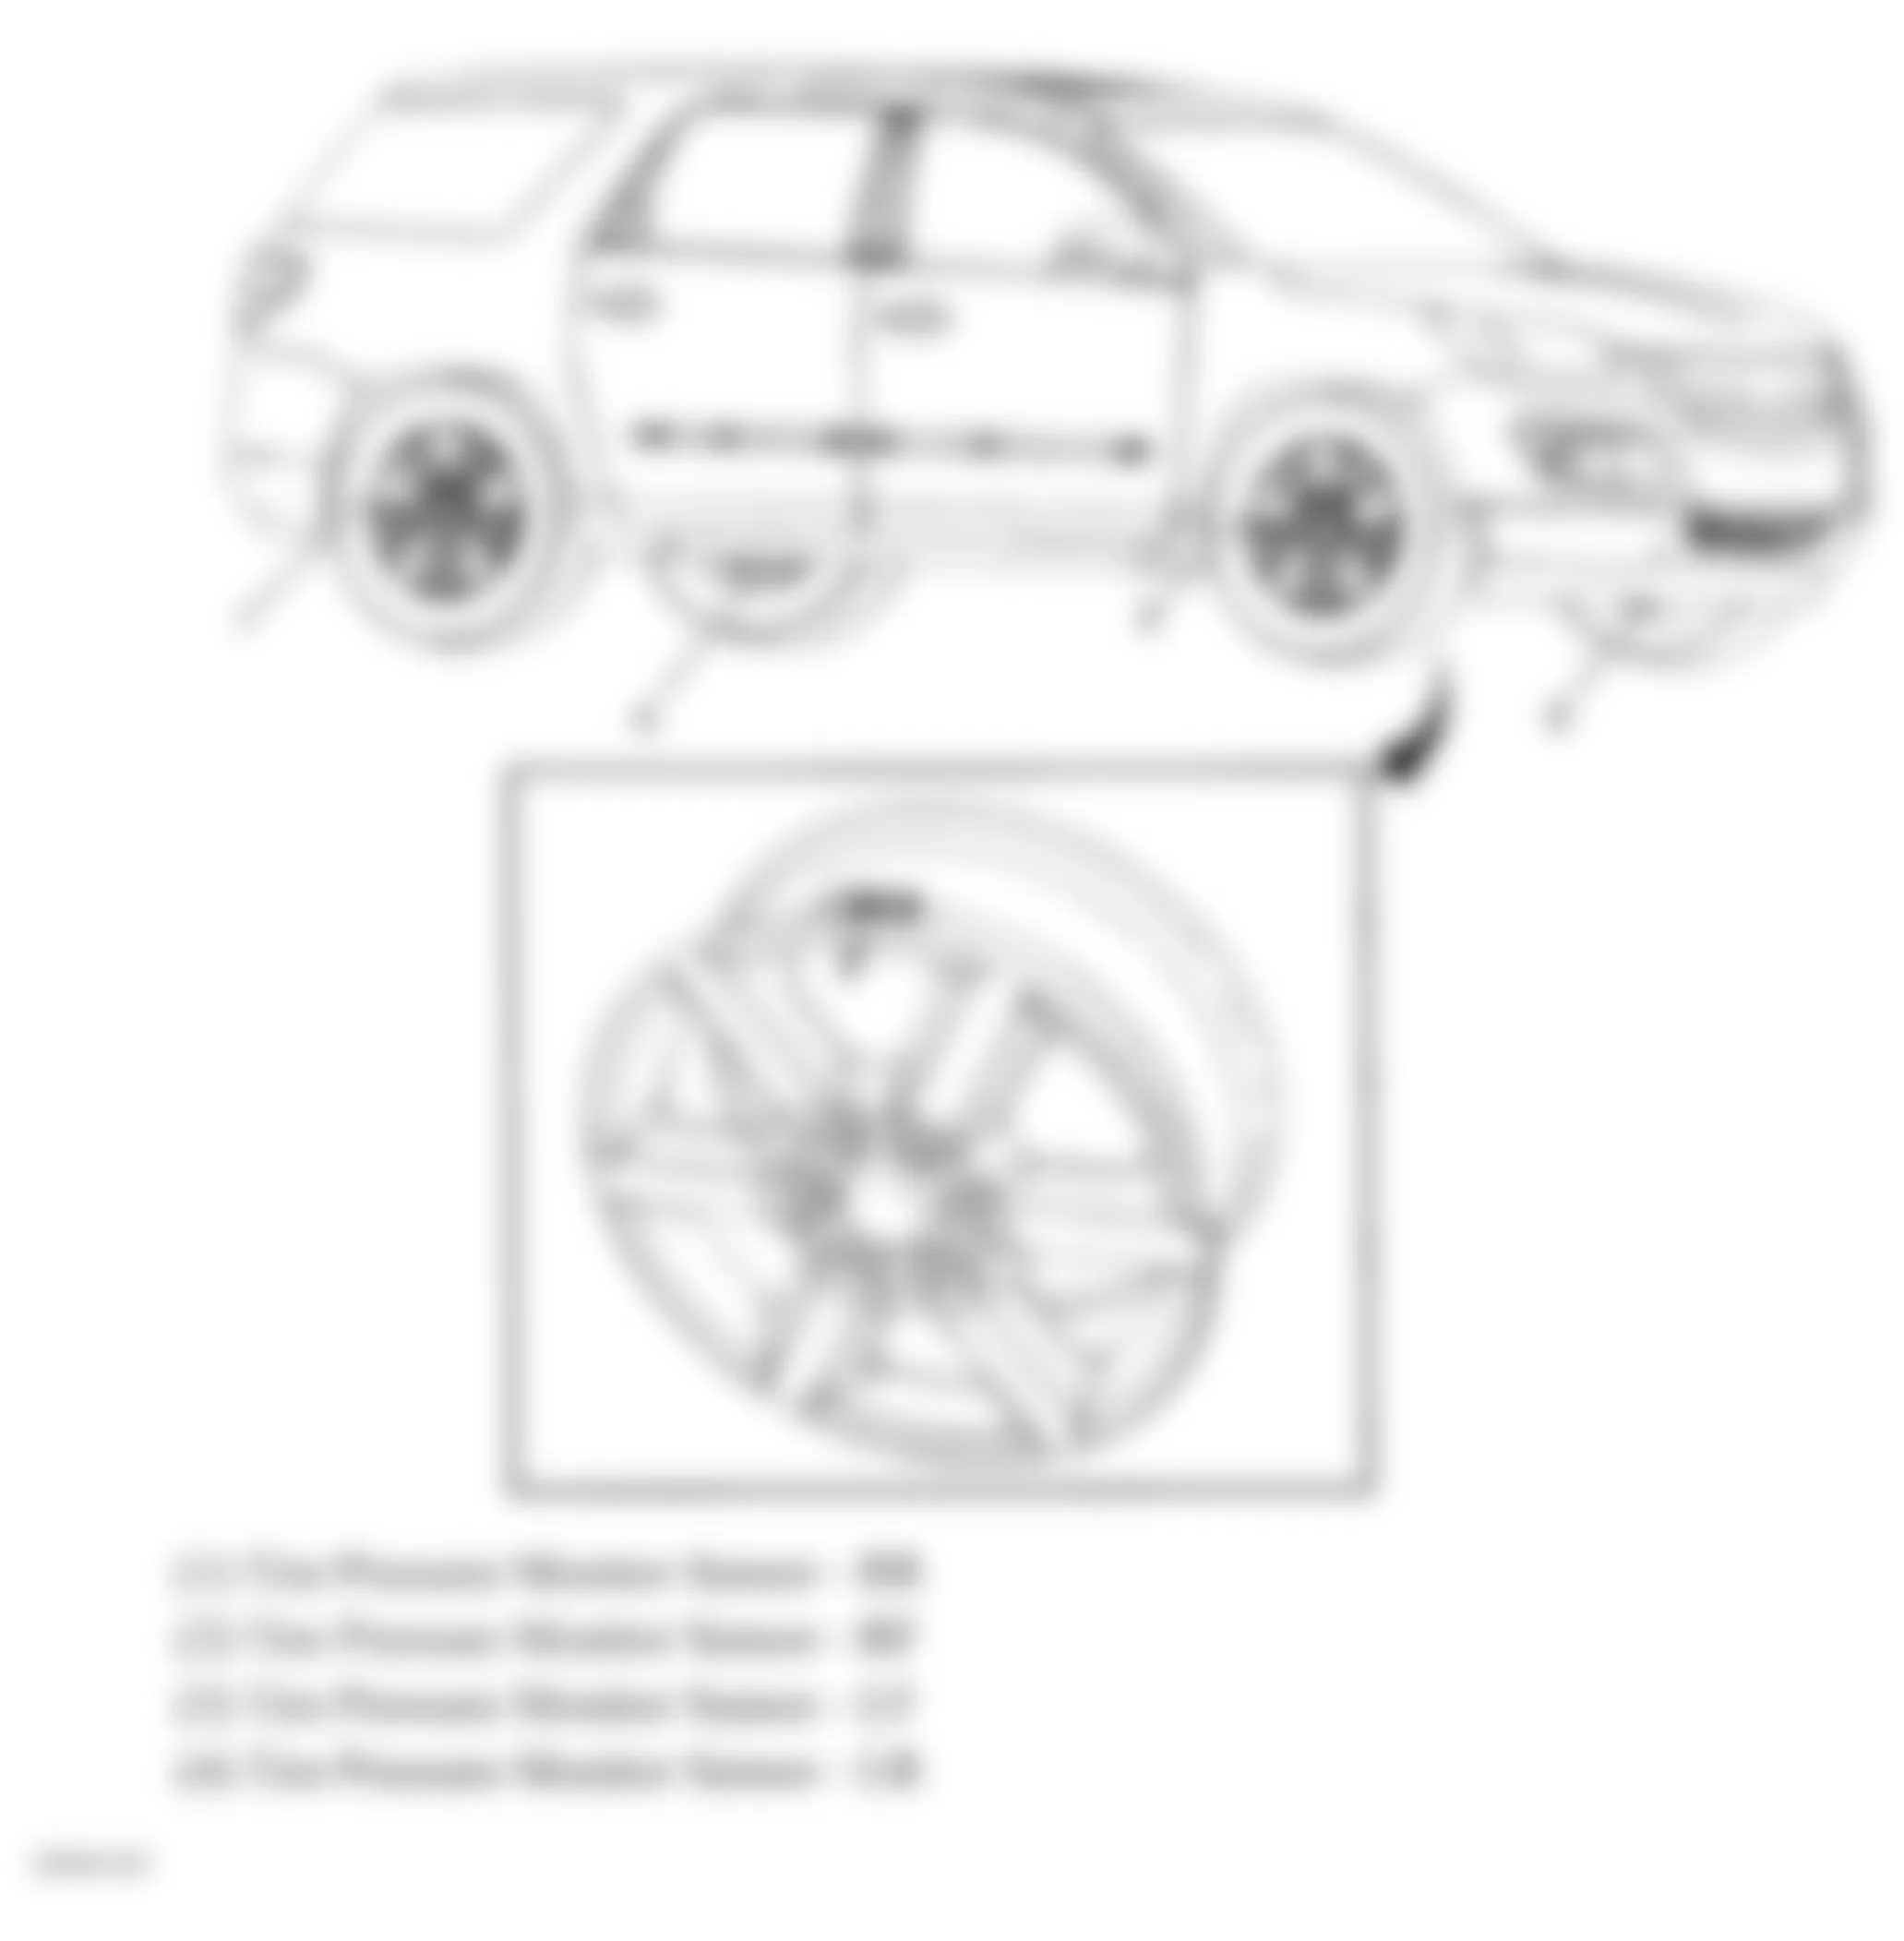 GMC Acadia SLE 2010 - Component Locations -  Vehicle Tire Overview